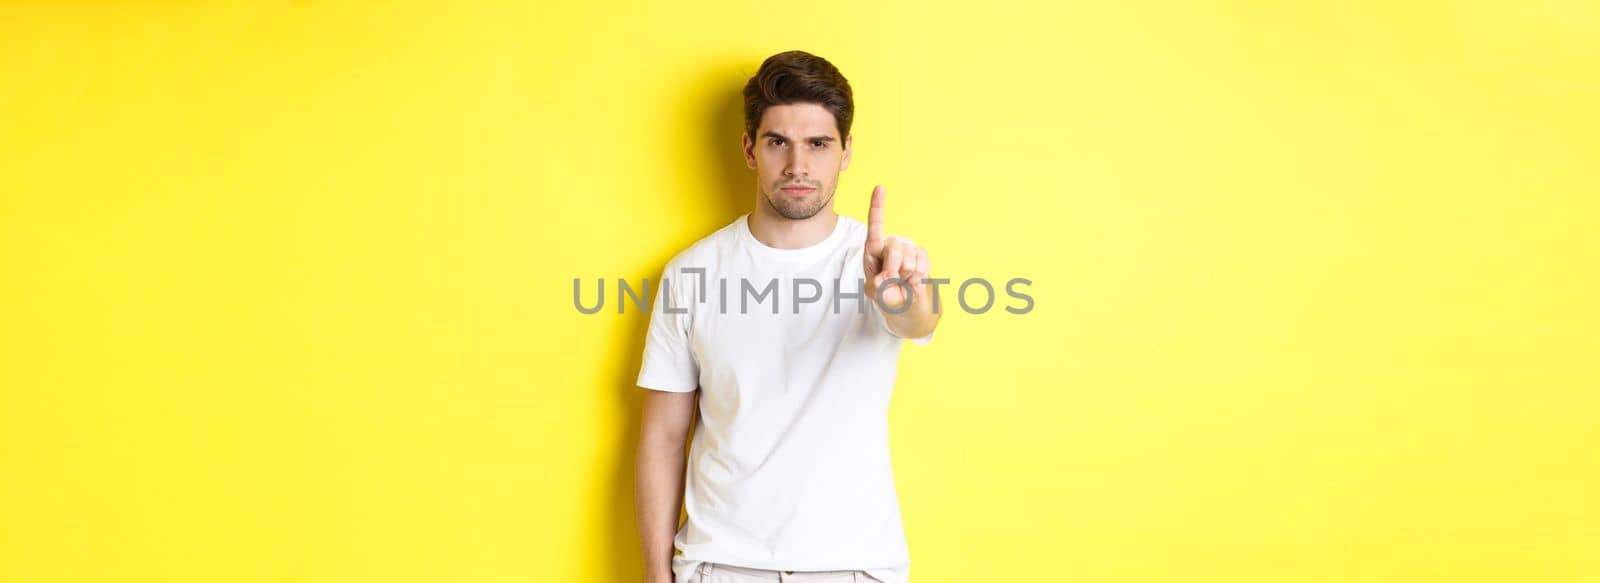 Confident man saying no, decline and prohibit something, showing one finger and frowning, standing over yellow background.